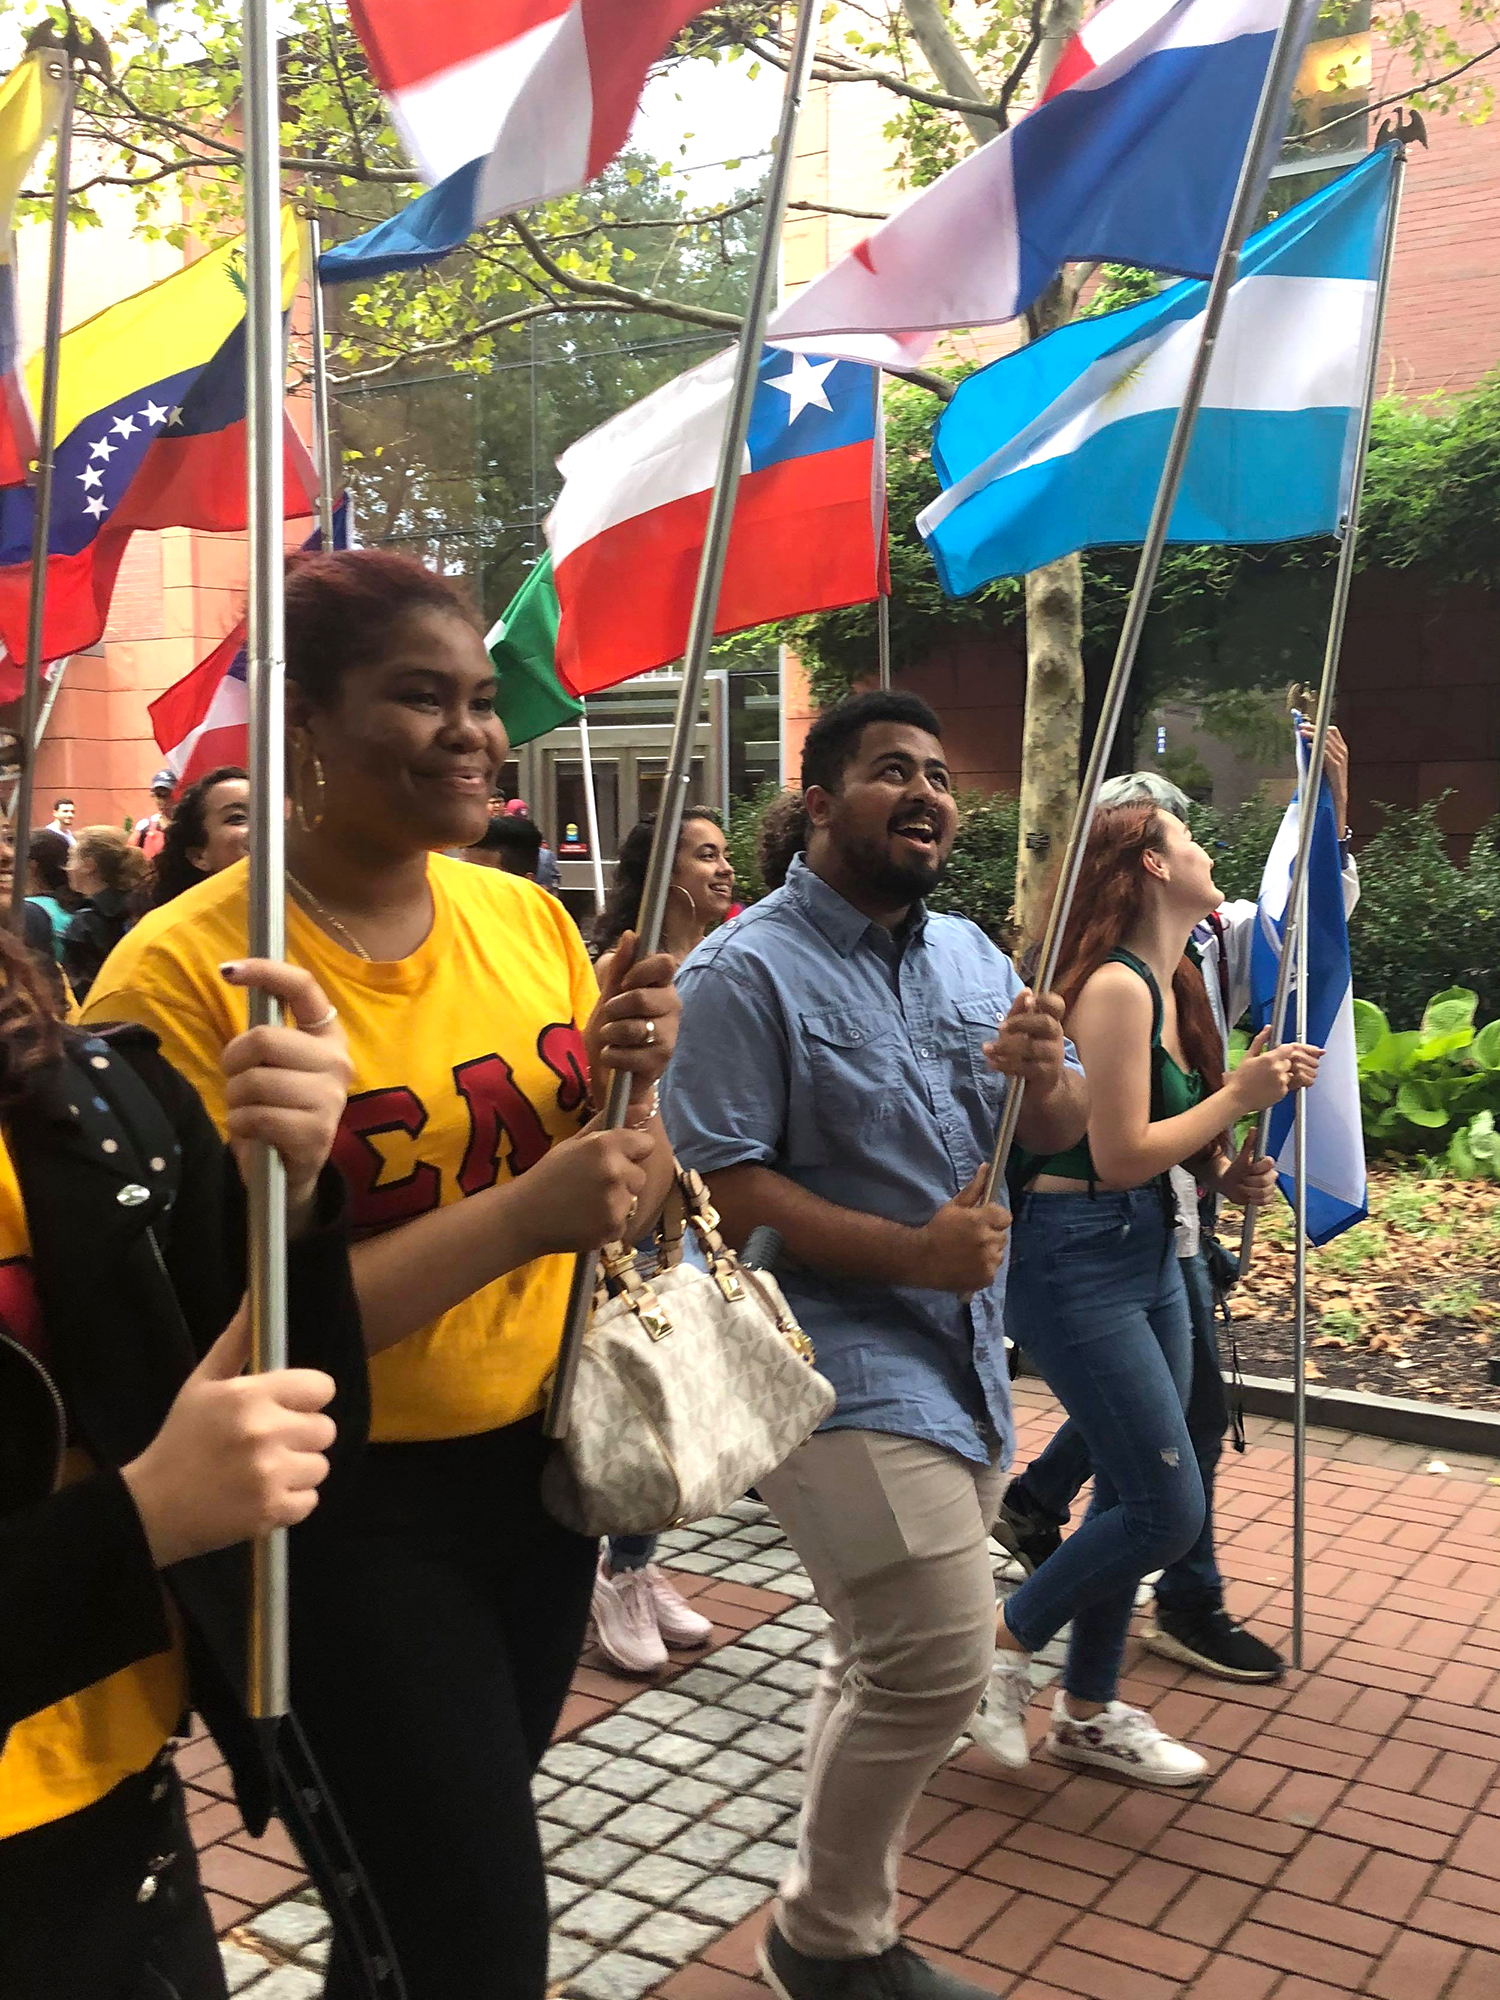 Hispanic Heritage march down Locust Walk with flags